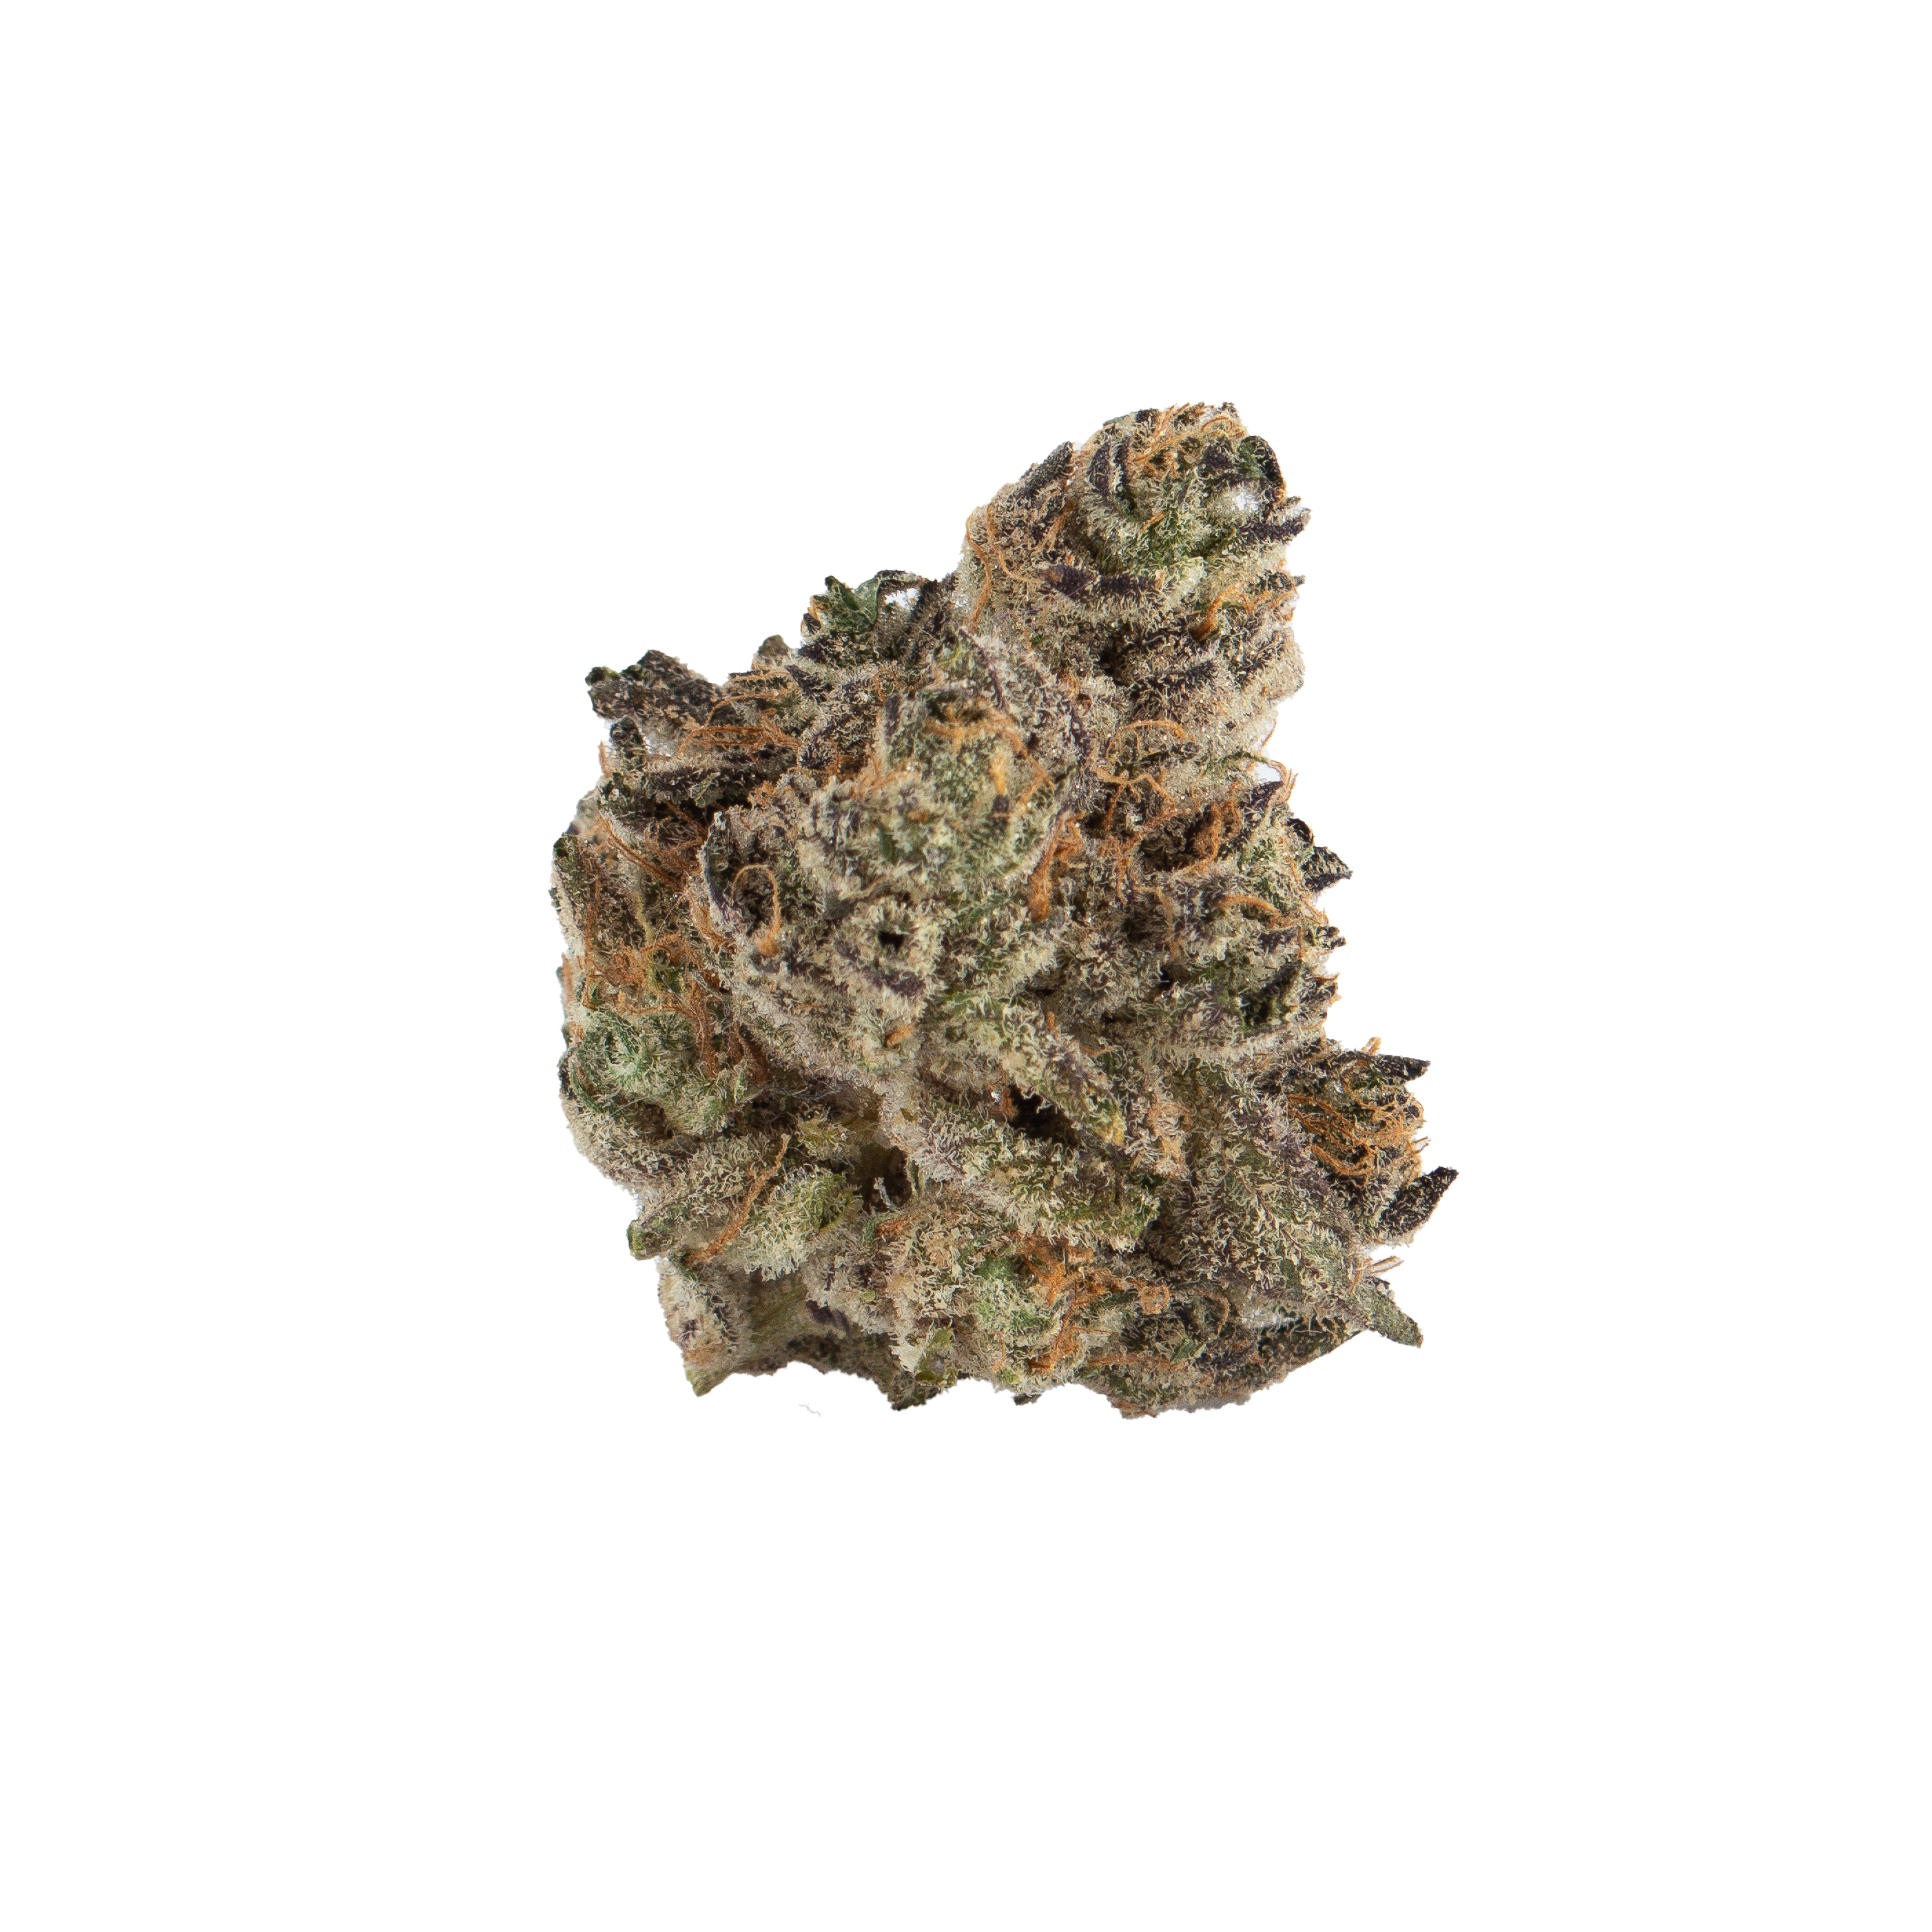 apple fritter strain for sale - buy weed online - Buy Apple Fritter Online